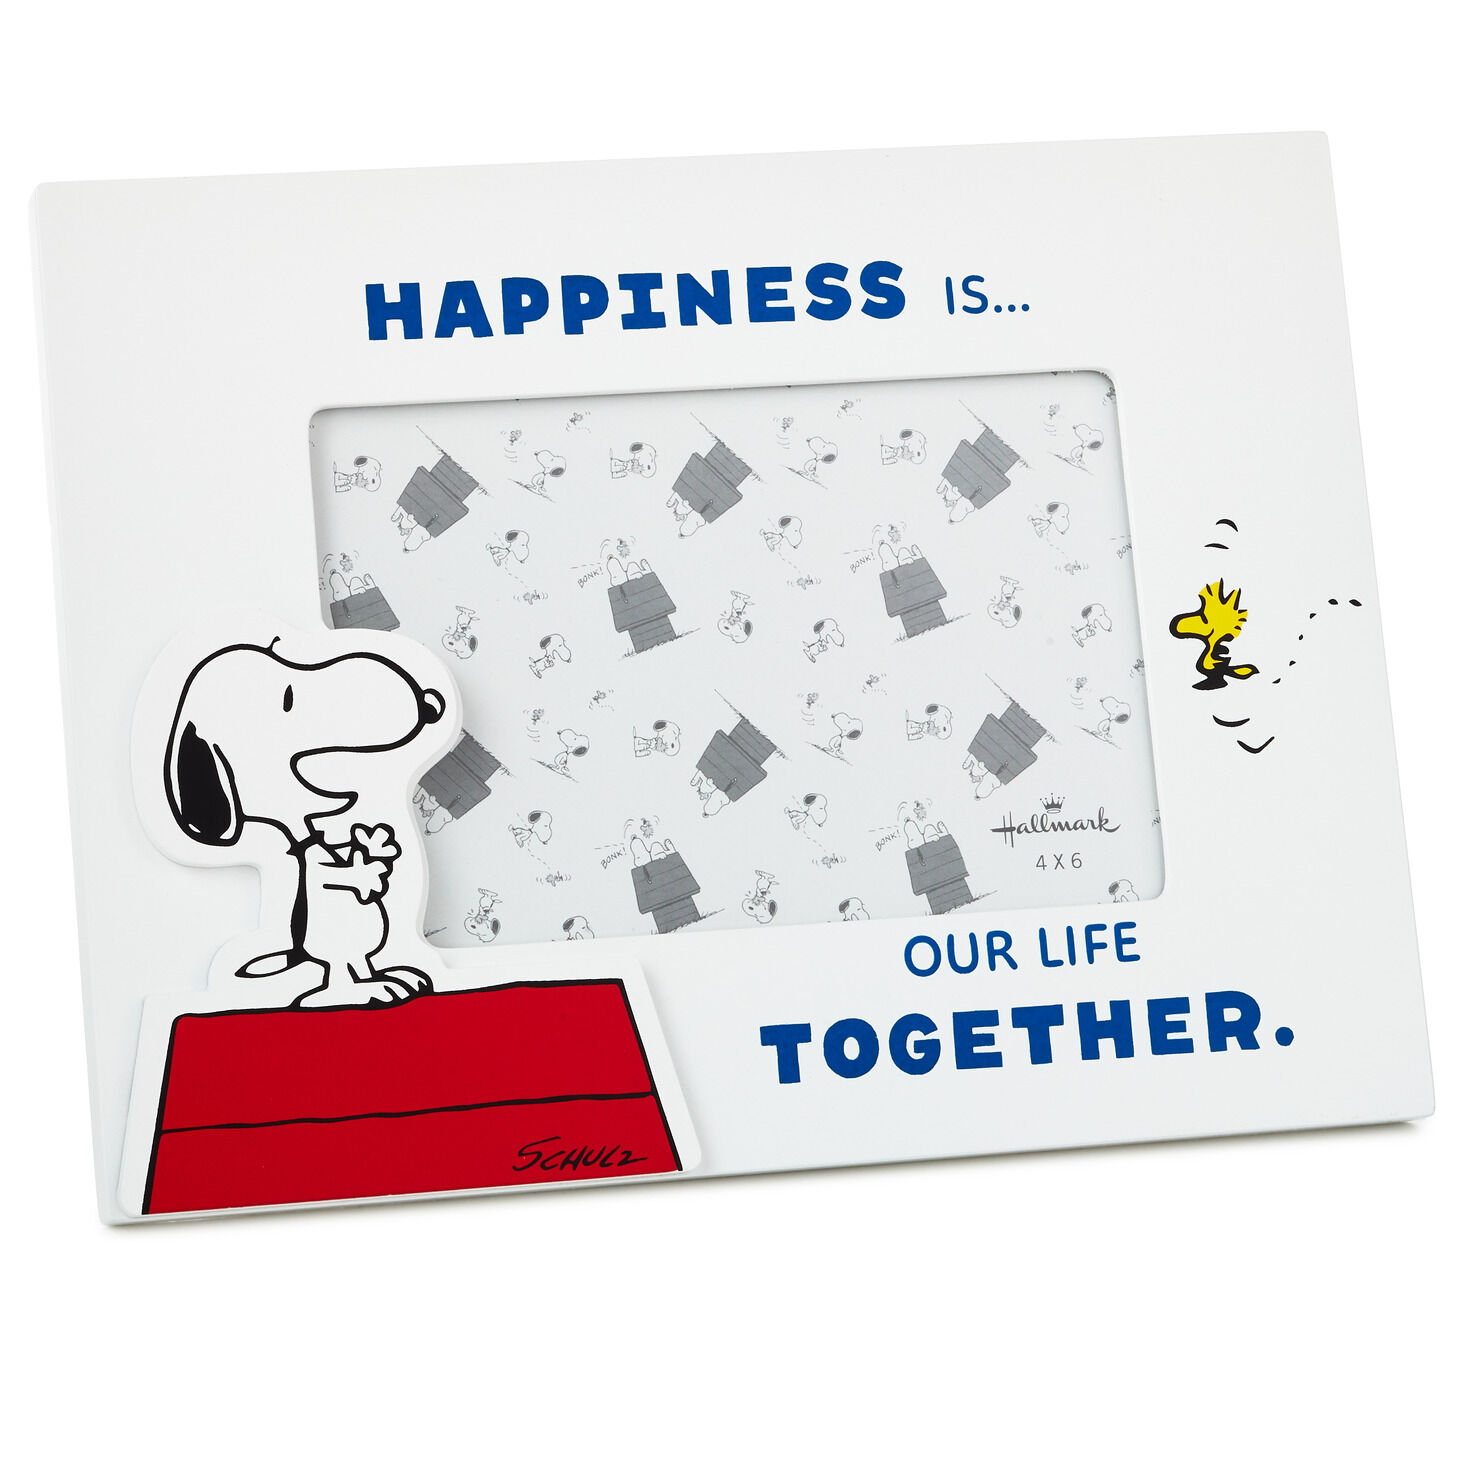 Peanuts Happiness Is a Friend Picture Frame 6x4 Picture Frames Movies & TV